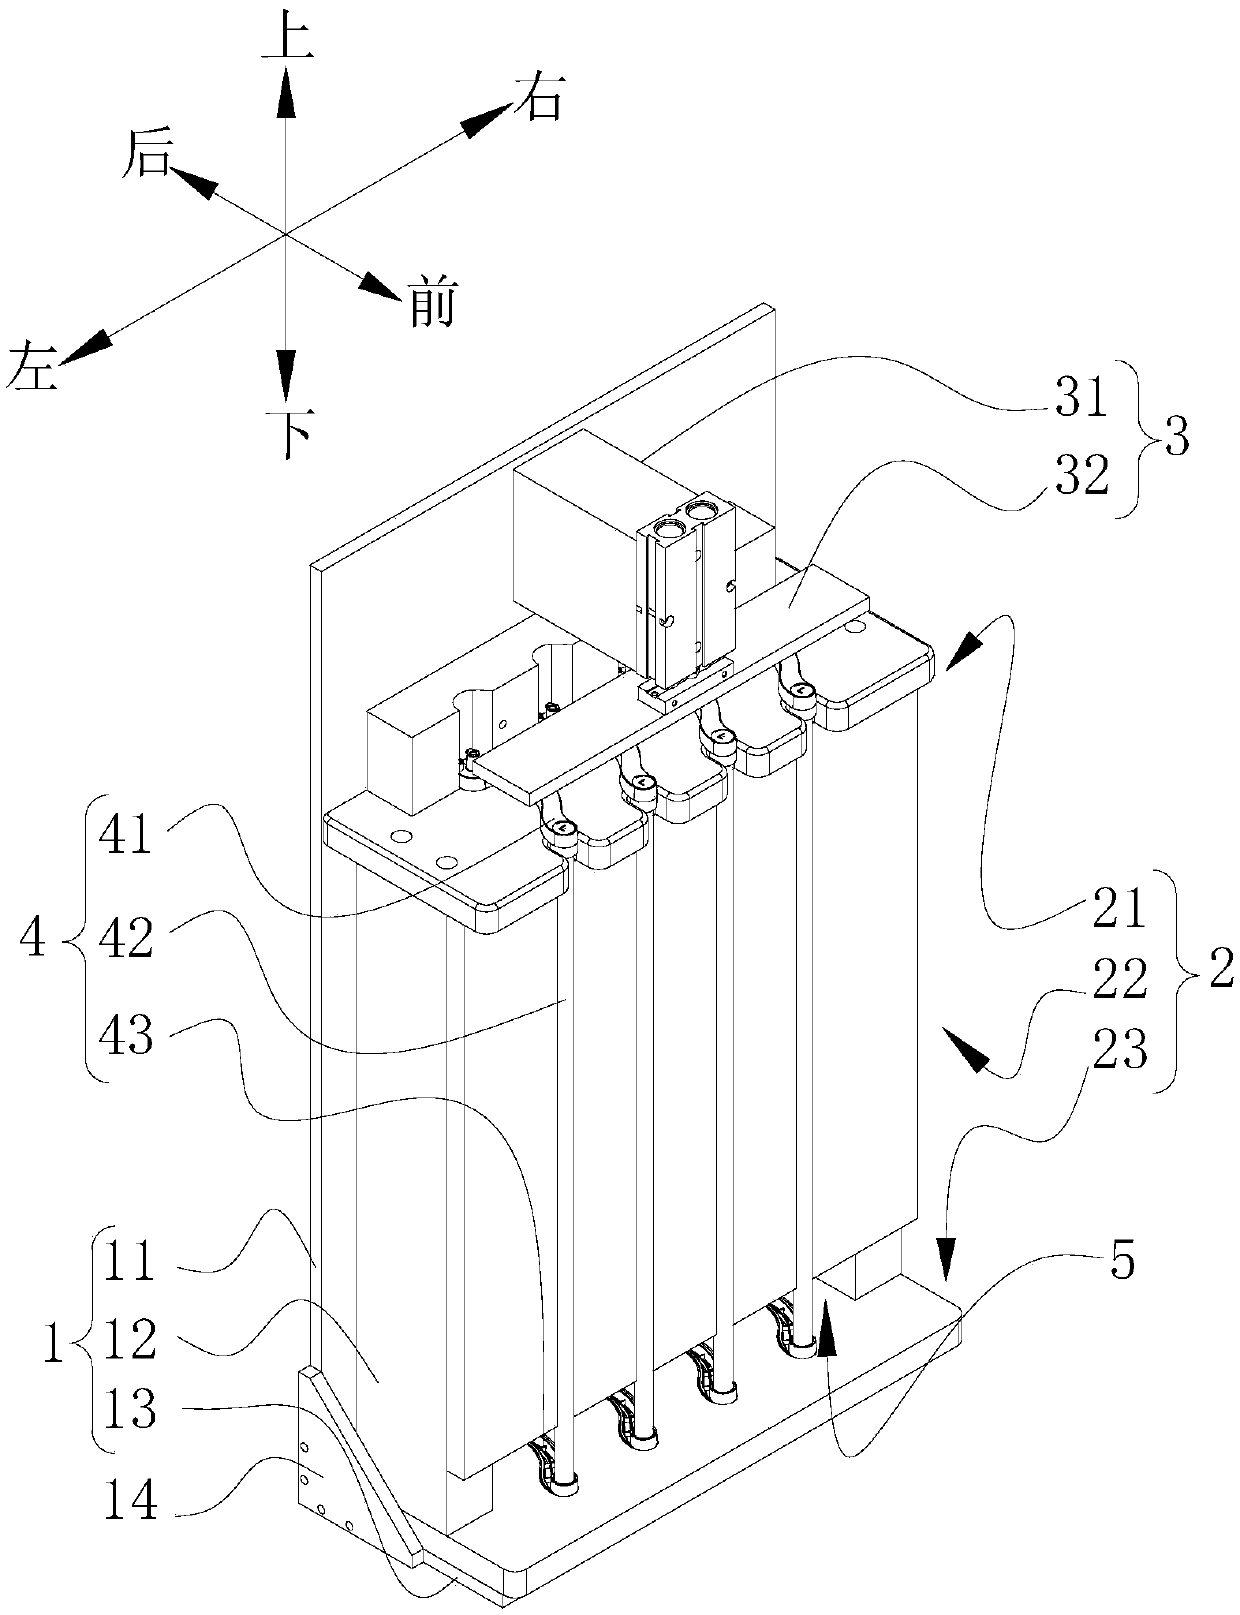 Device for assembling electric heater clothes hangers